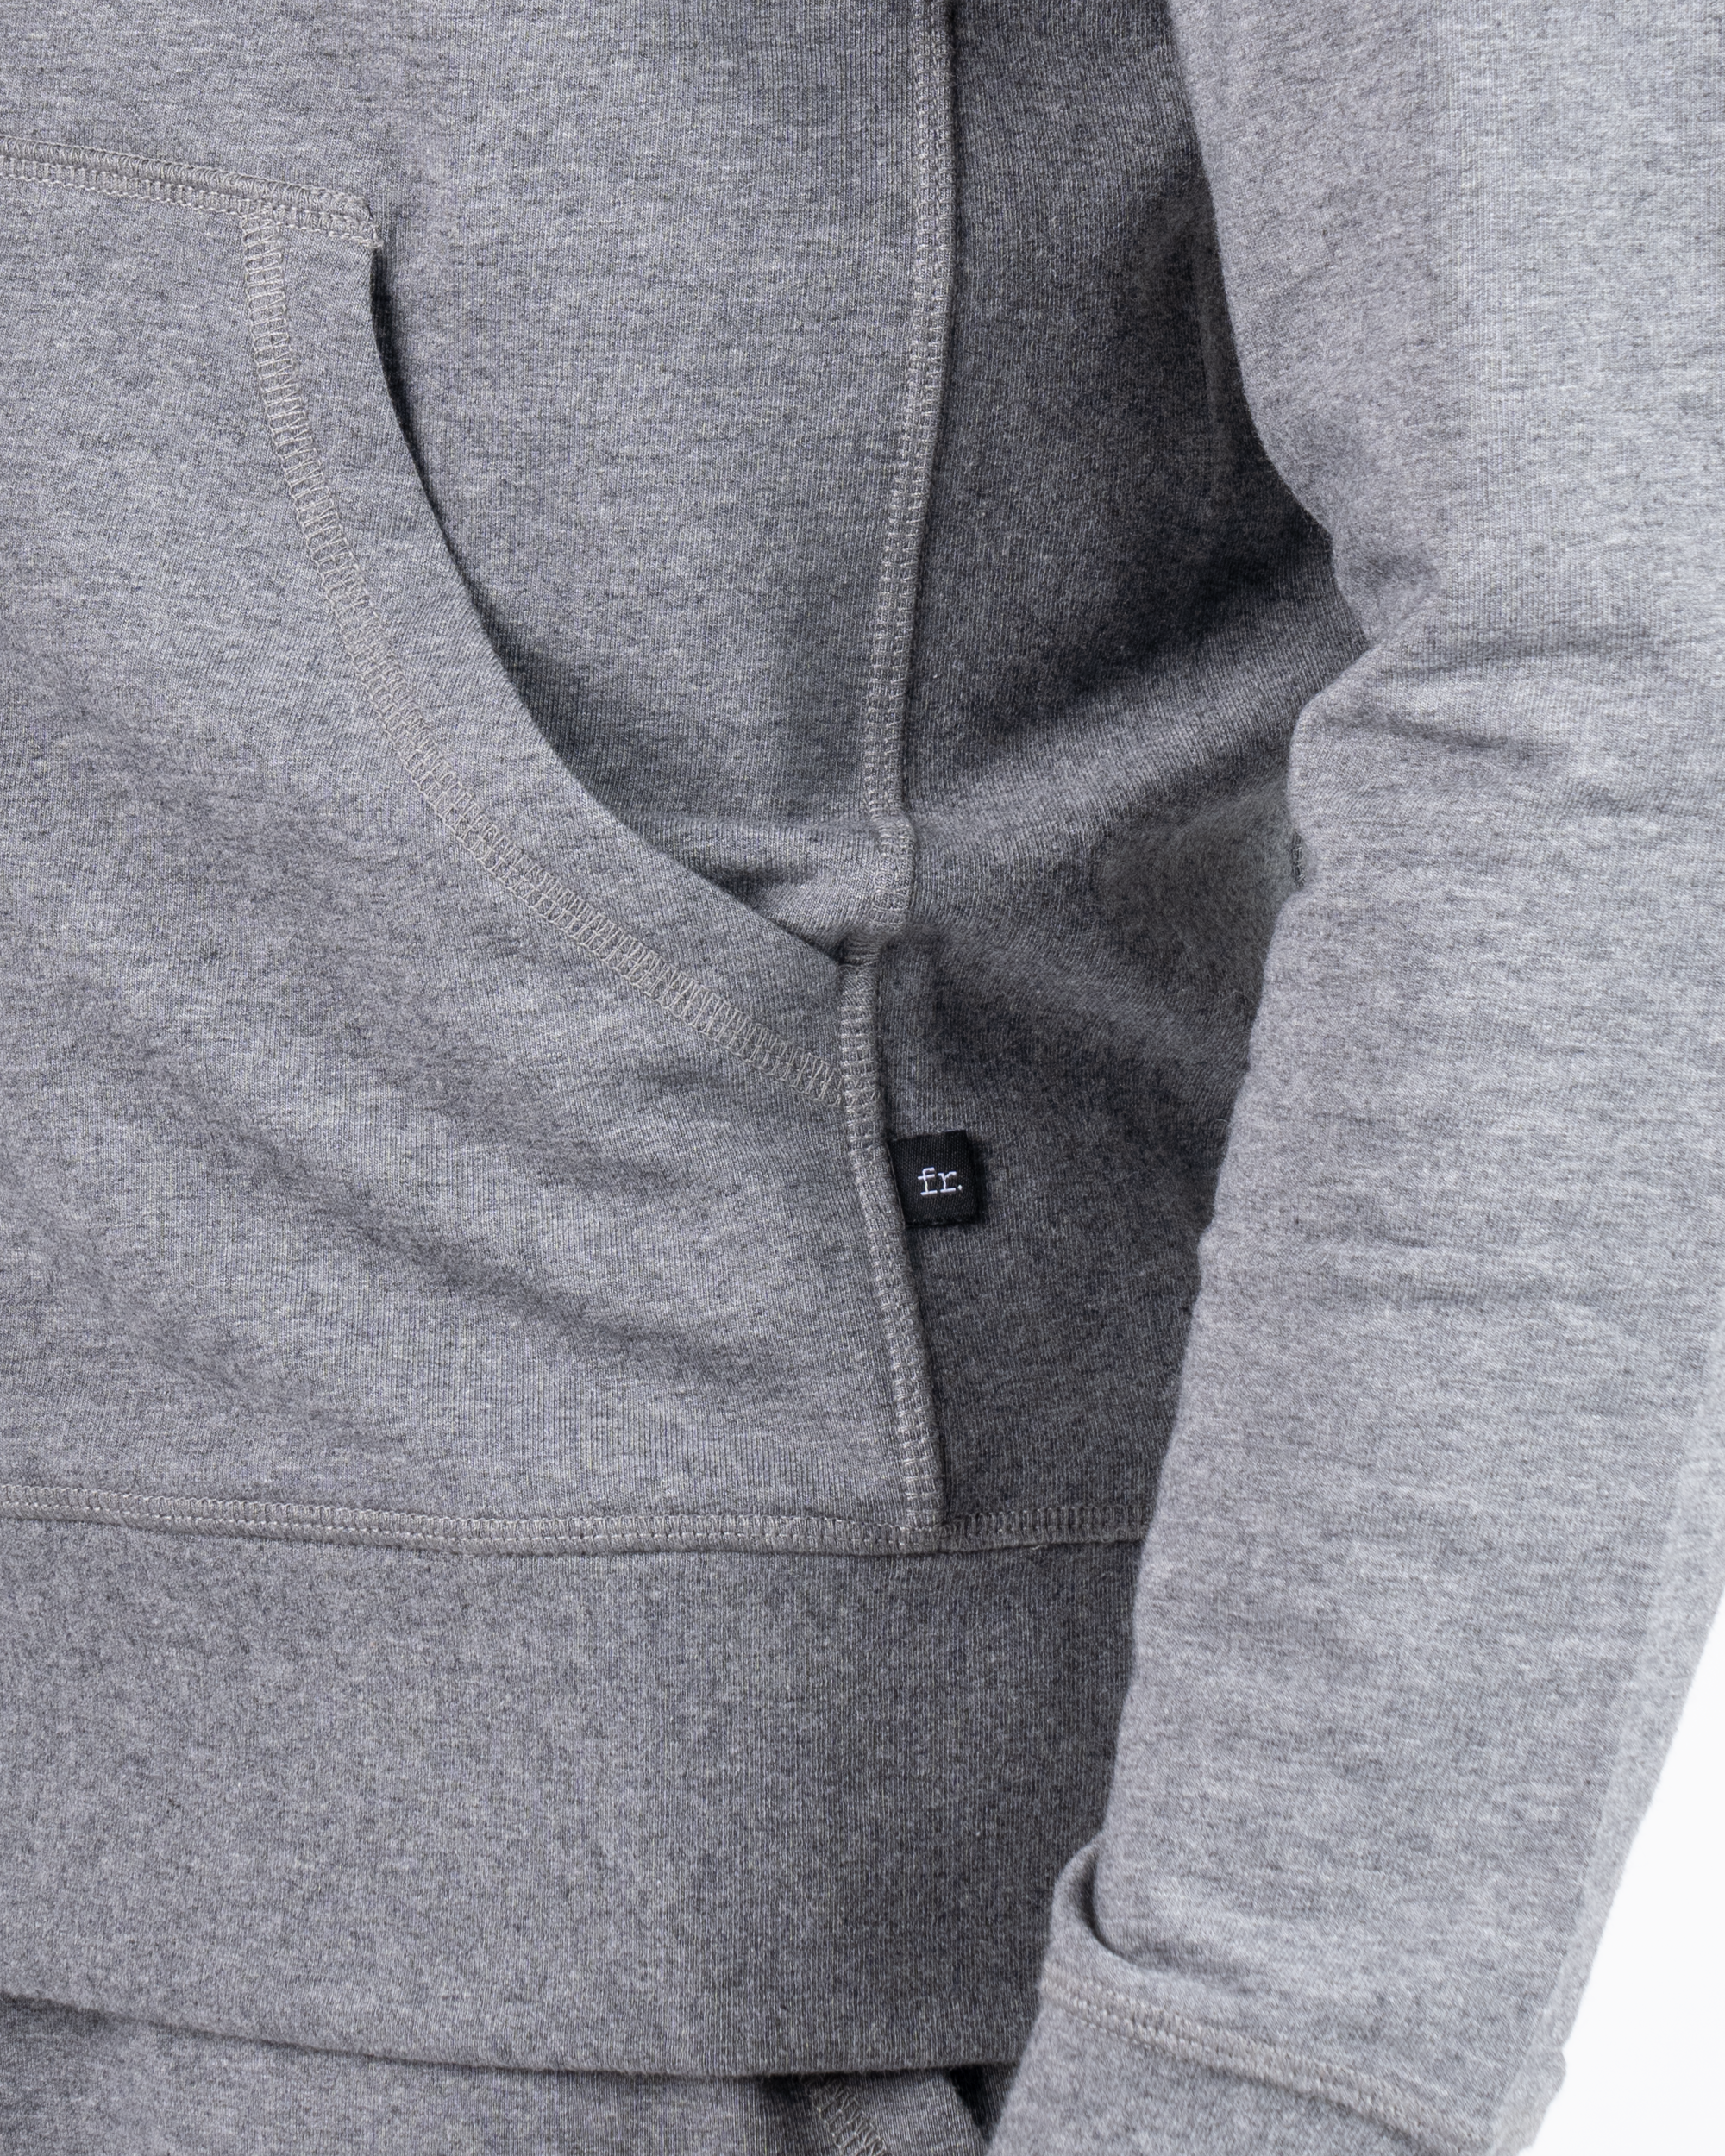 Foreign Rider Co Technical Fabric Grey Hoodie Bottom Front Pocket Detail